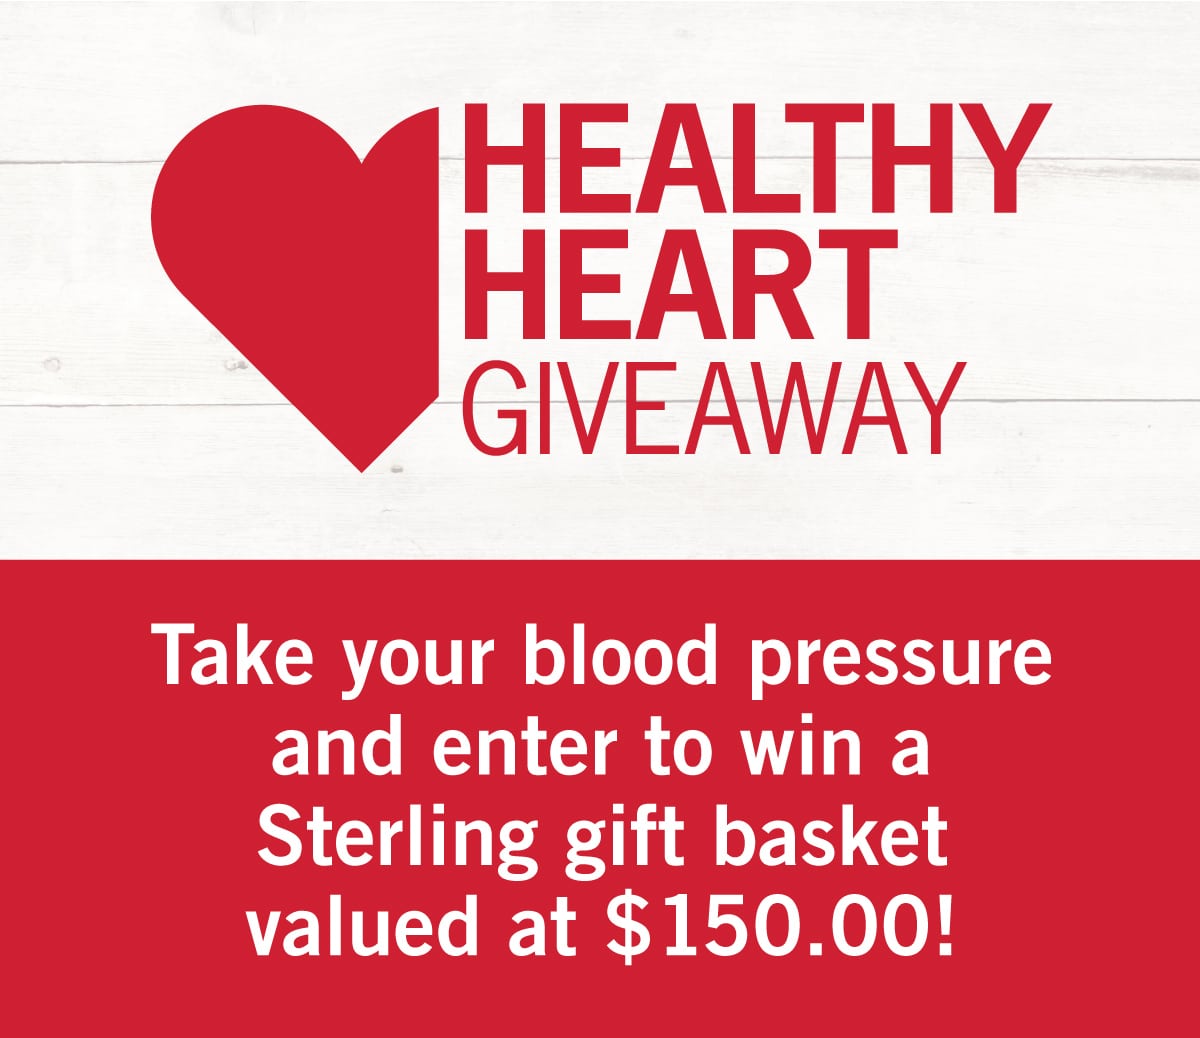 Healthy Heart Giveaway. Take your blood pressure and enter to win a Sterling gift basket valued at $150.00